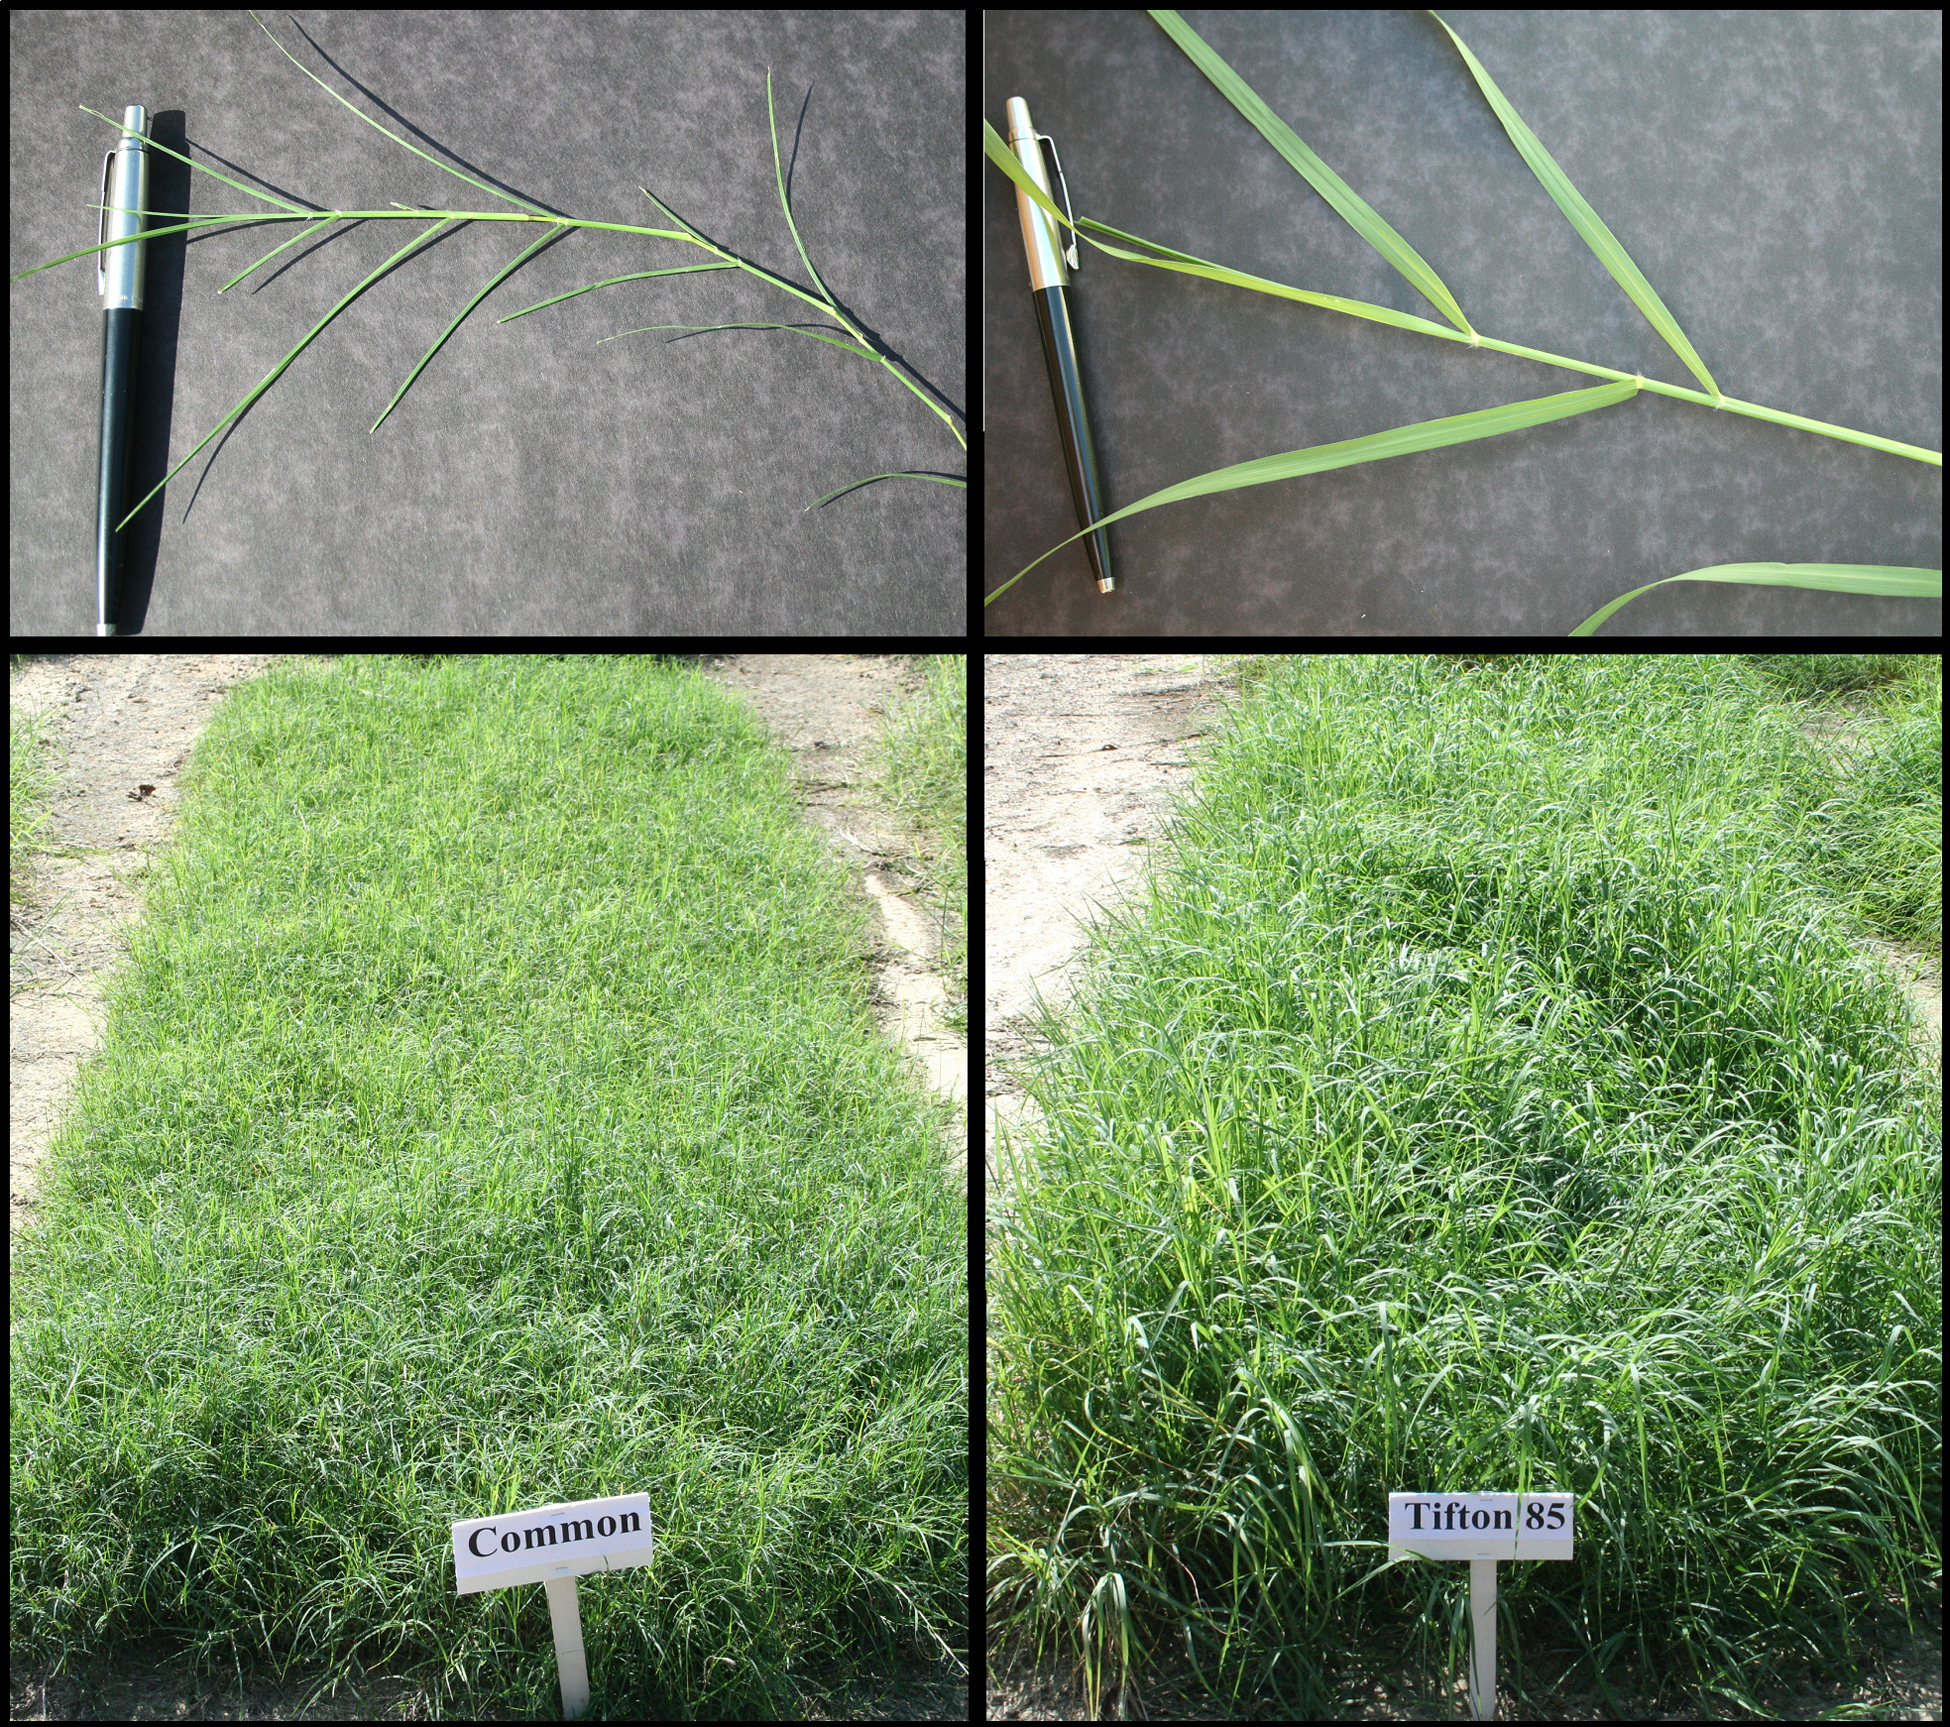 Figure 7. Common bermudagrass (left) produces lower yields and quality than Tifton-85 (right), an improved hybrid bermudagrass.